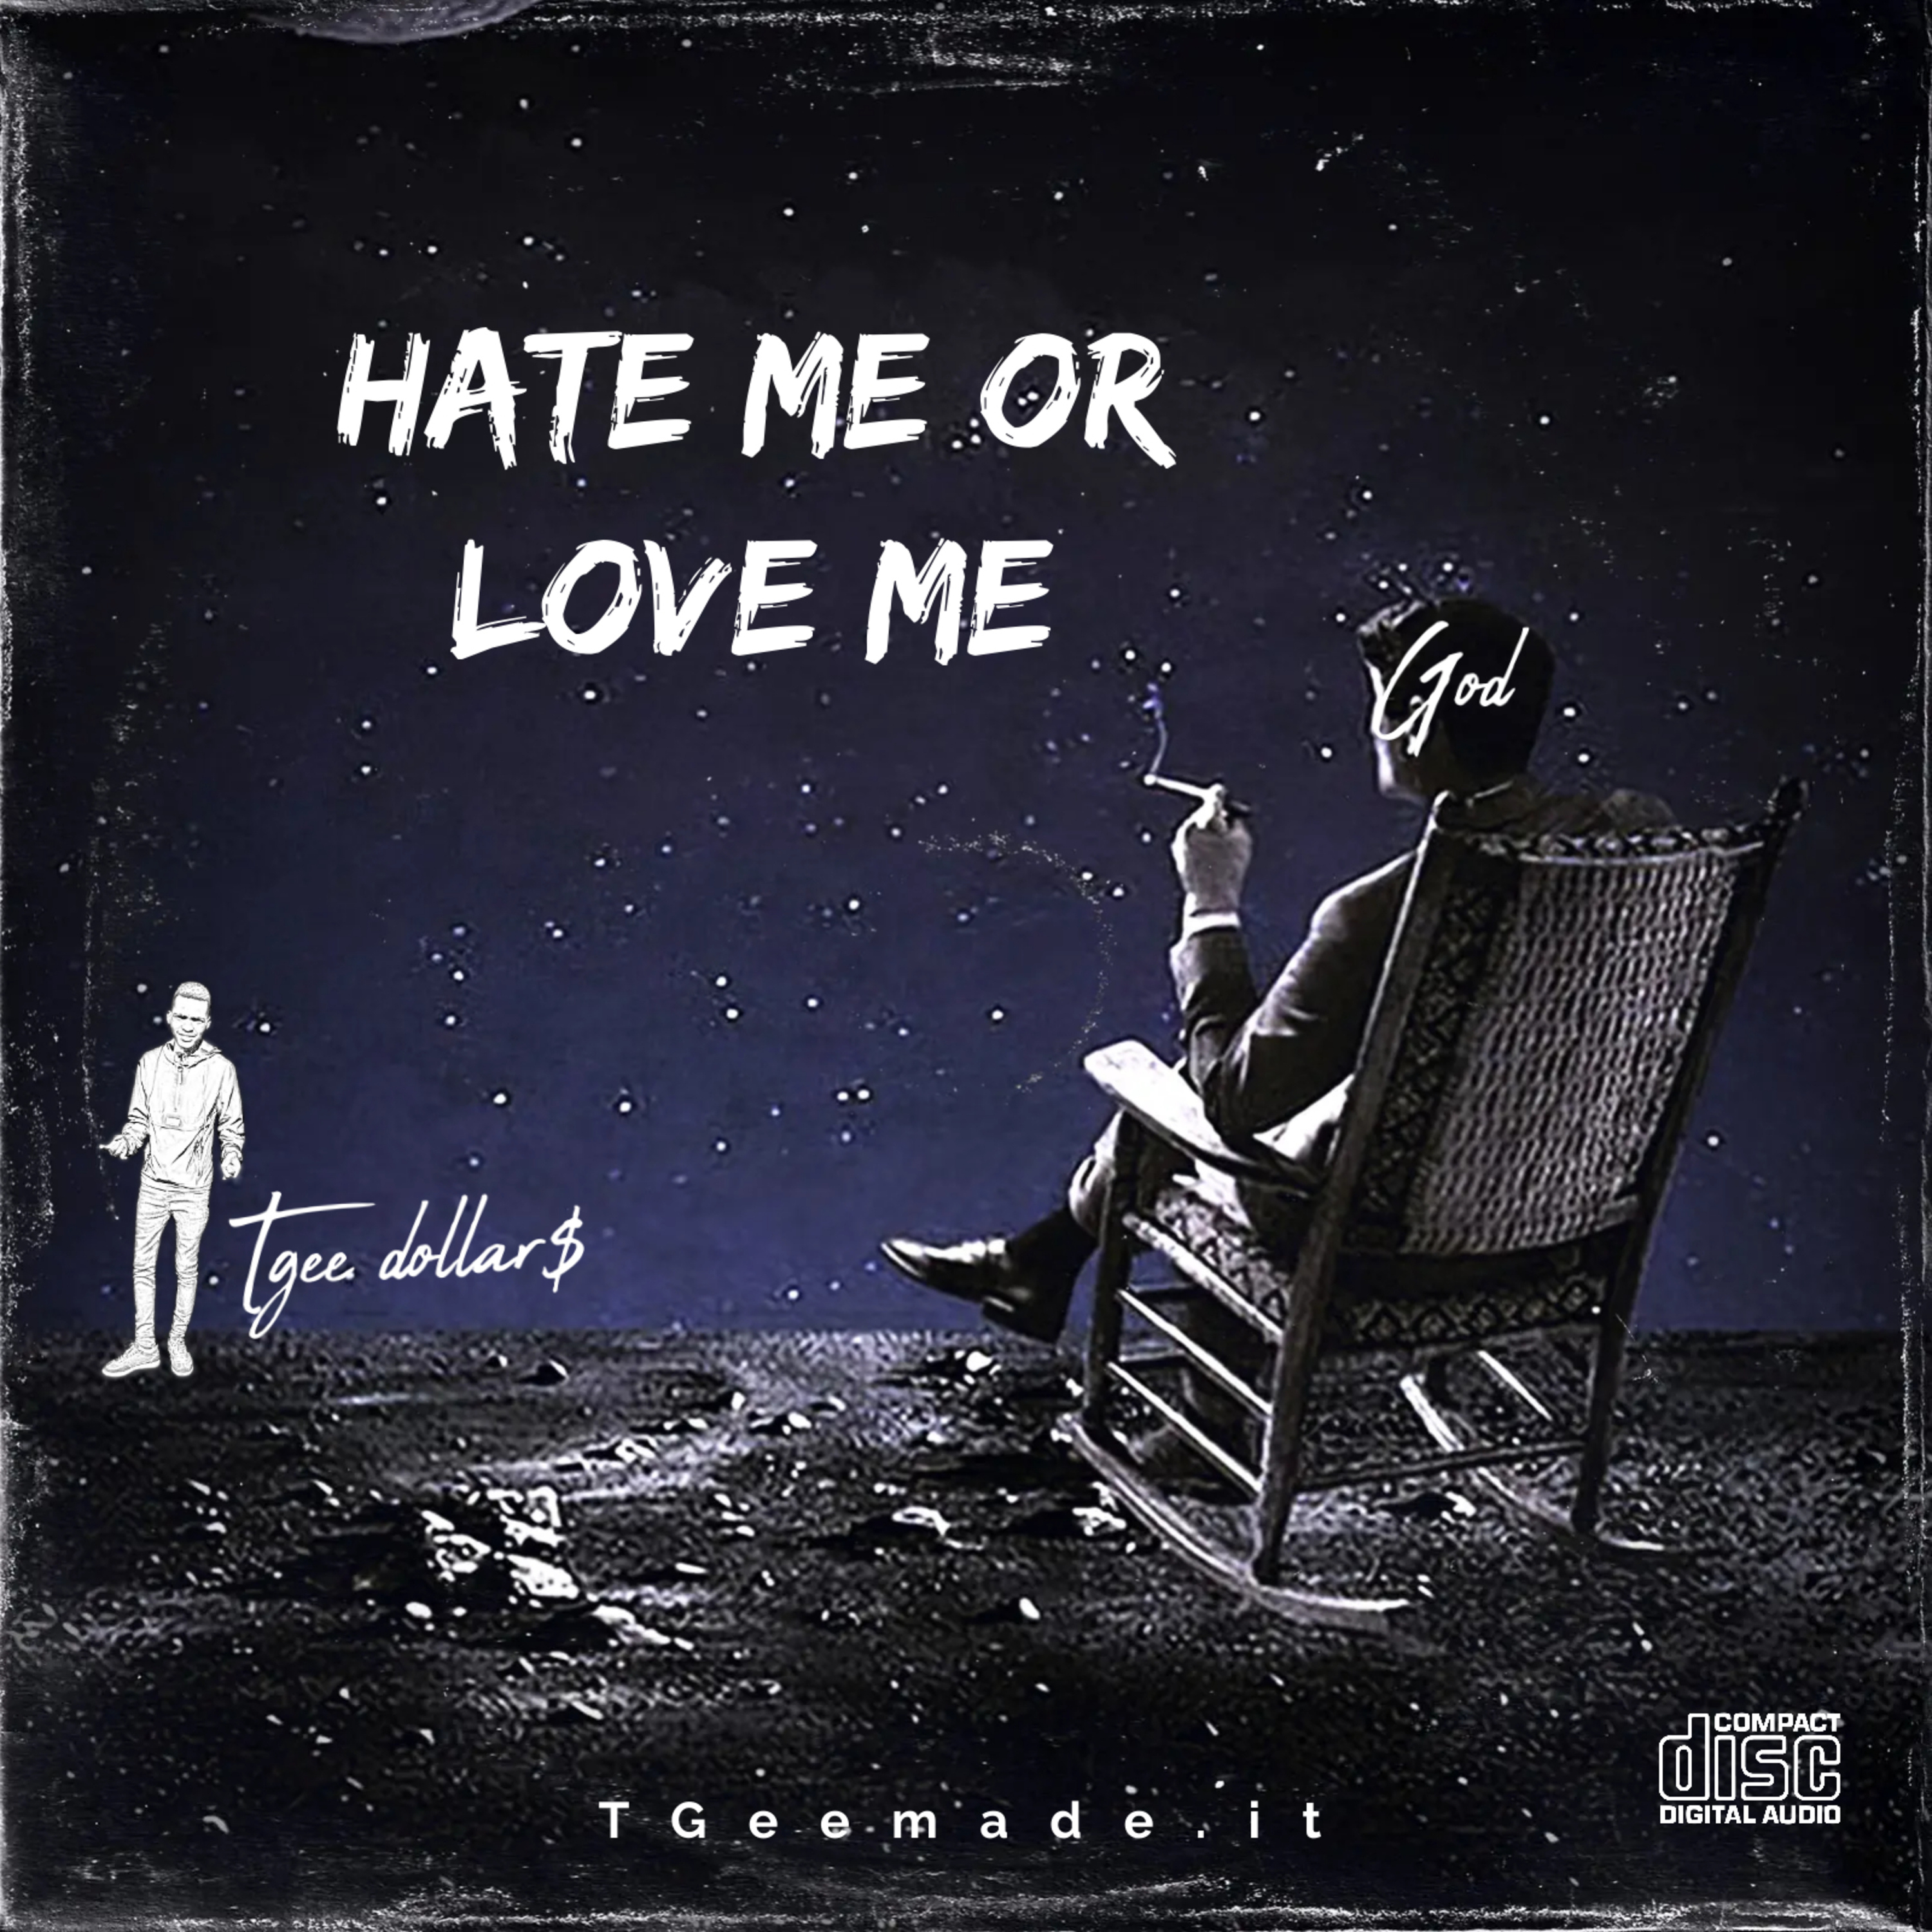 Hate Me or Love Me - TGee dollar$